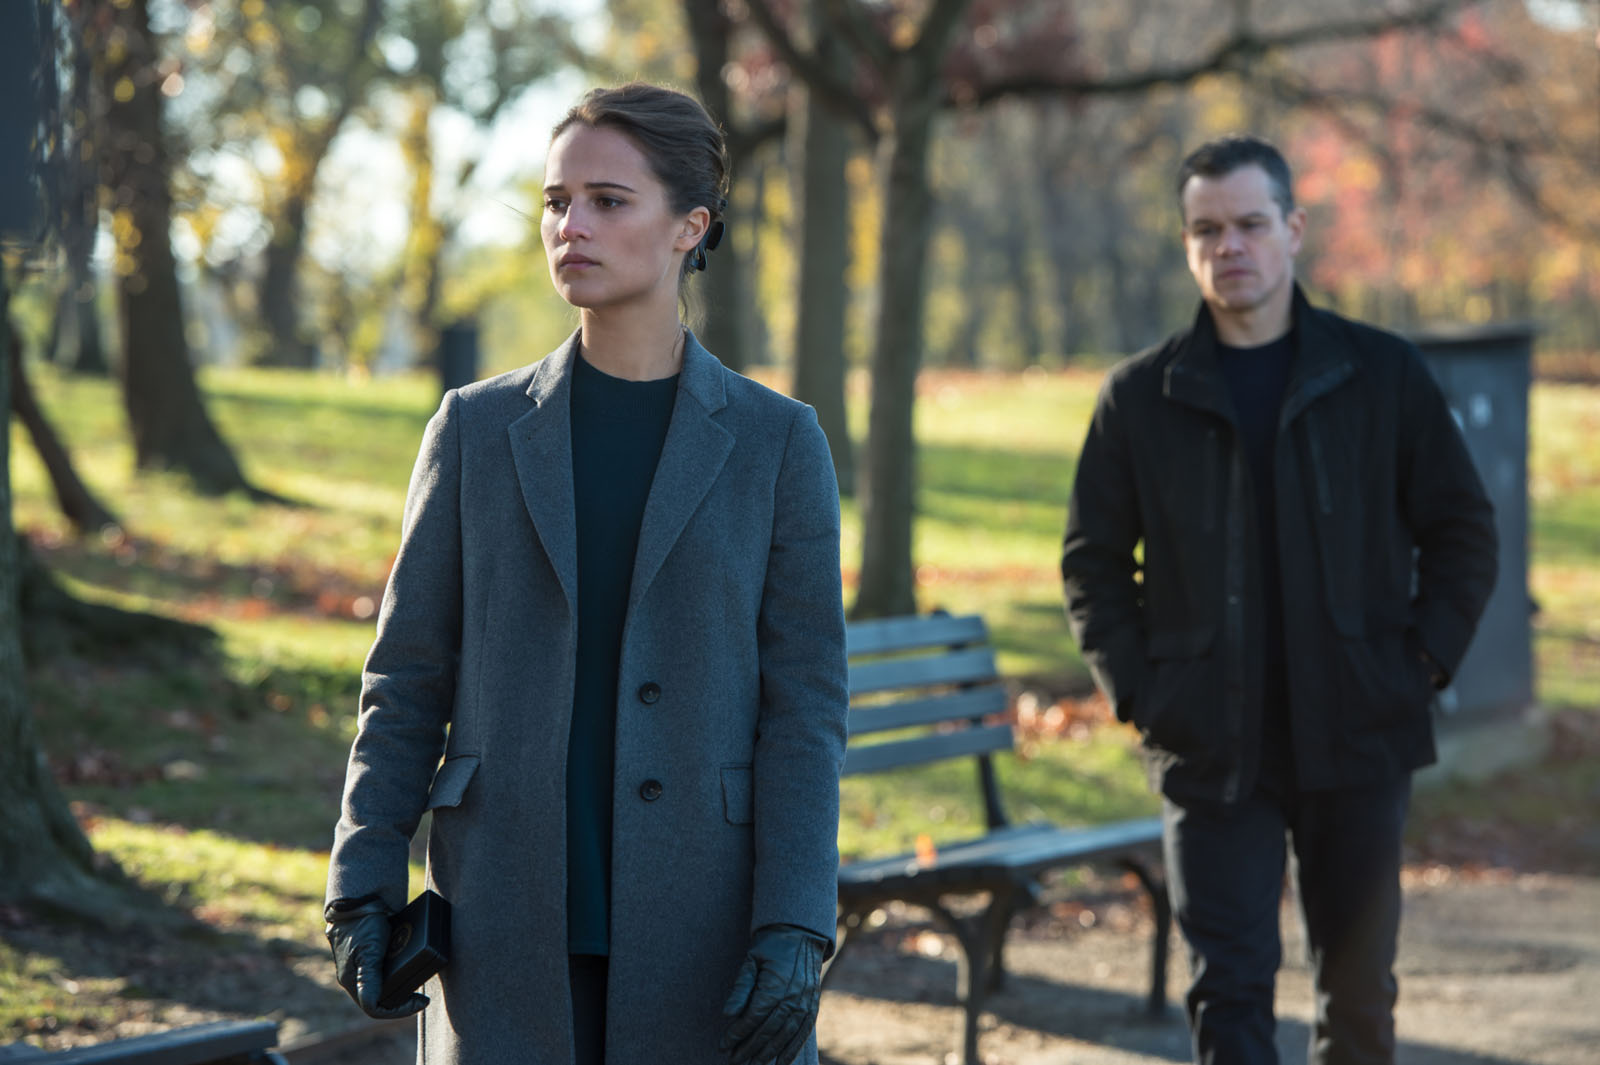 Heather (Vikander) and Bourne (Damon) are each other's foils in "Jason Bourne".